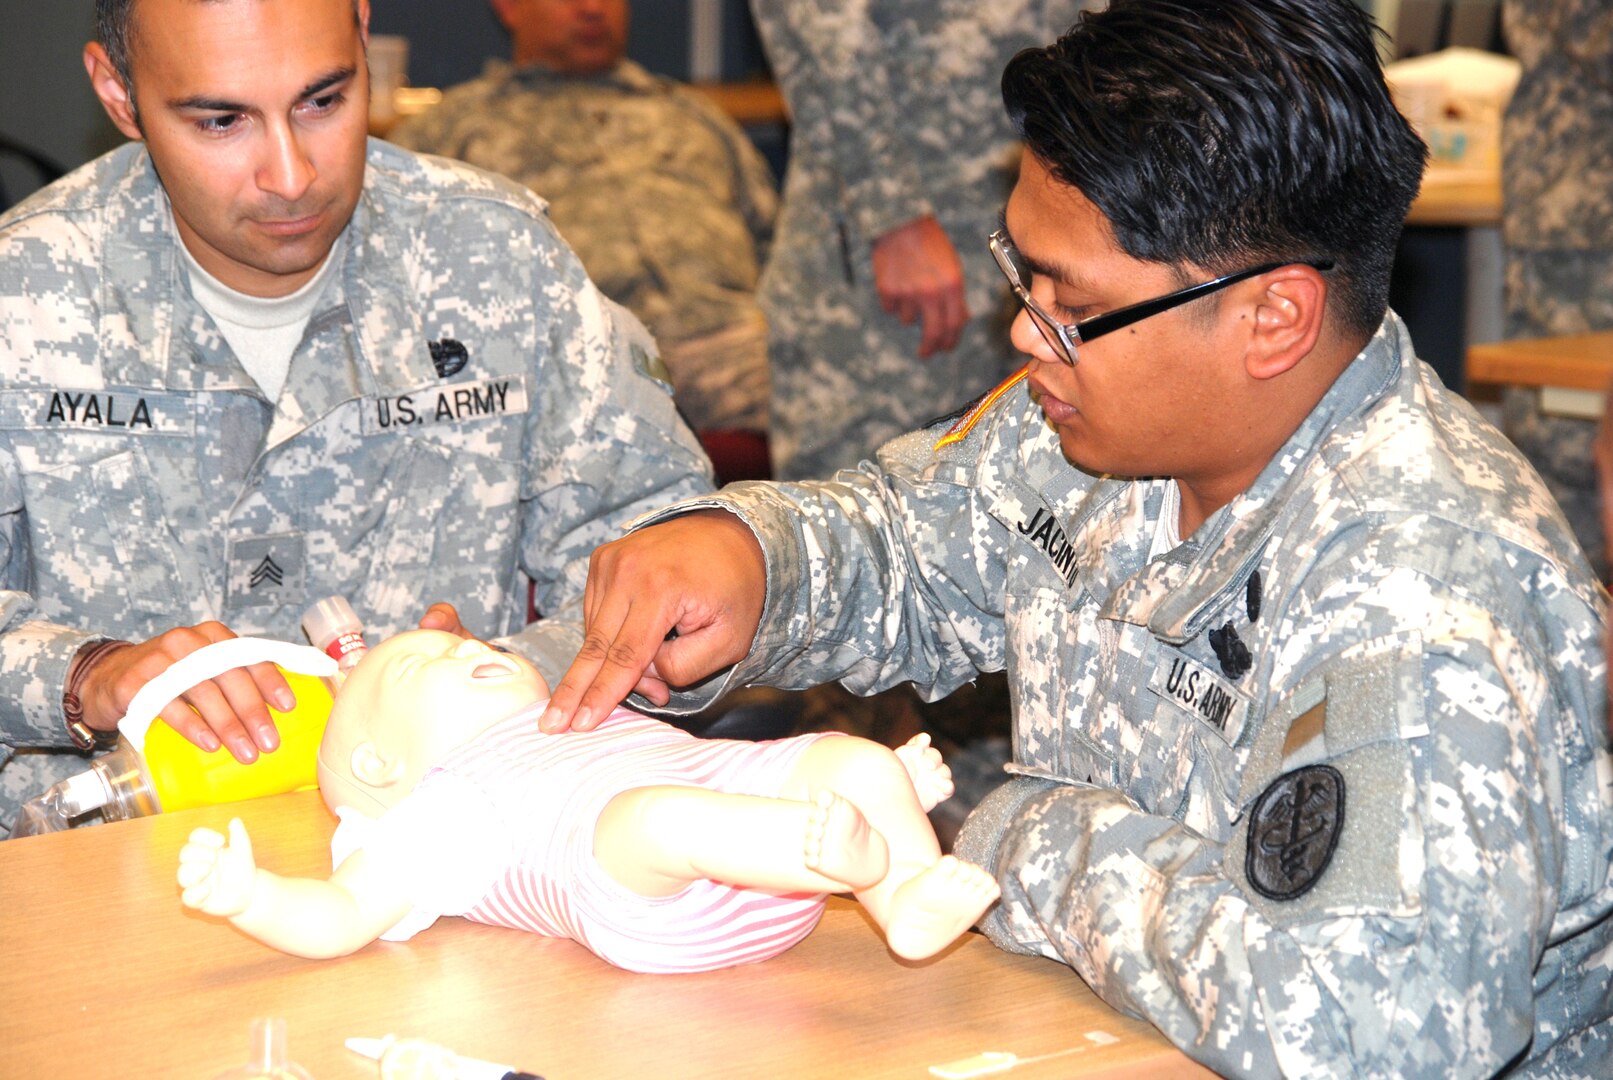 Combat medic wounded warriors Sgt. Vicente Ayala and Cpl. Aaron Jacinto perform cardiopulmonary resuscitation on a simulated baby mannequin during the basic life support segment of the 68W combat medic training at Joint Base San Antonio-Fort Sam Houston Sept. 11.
Photo by Marsha Huffman